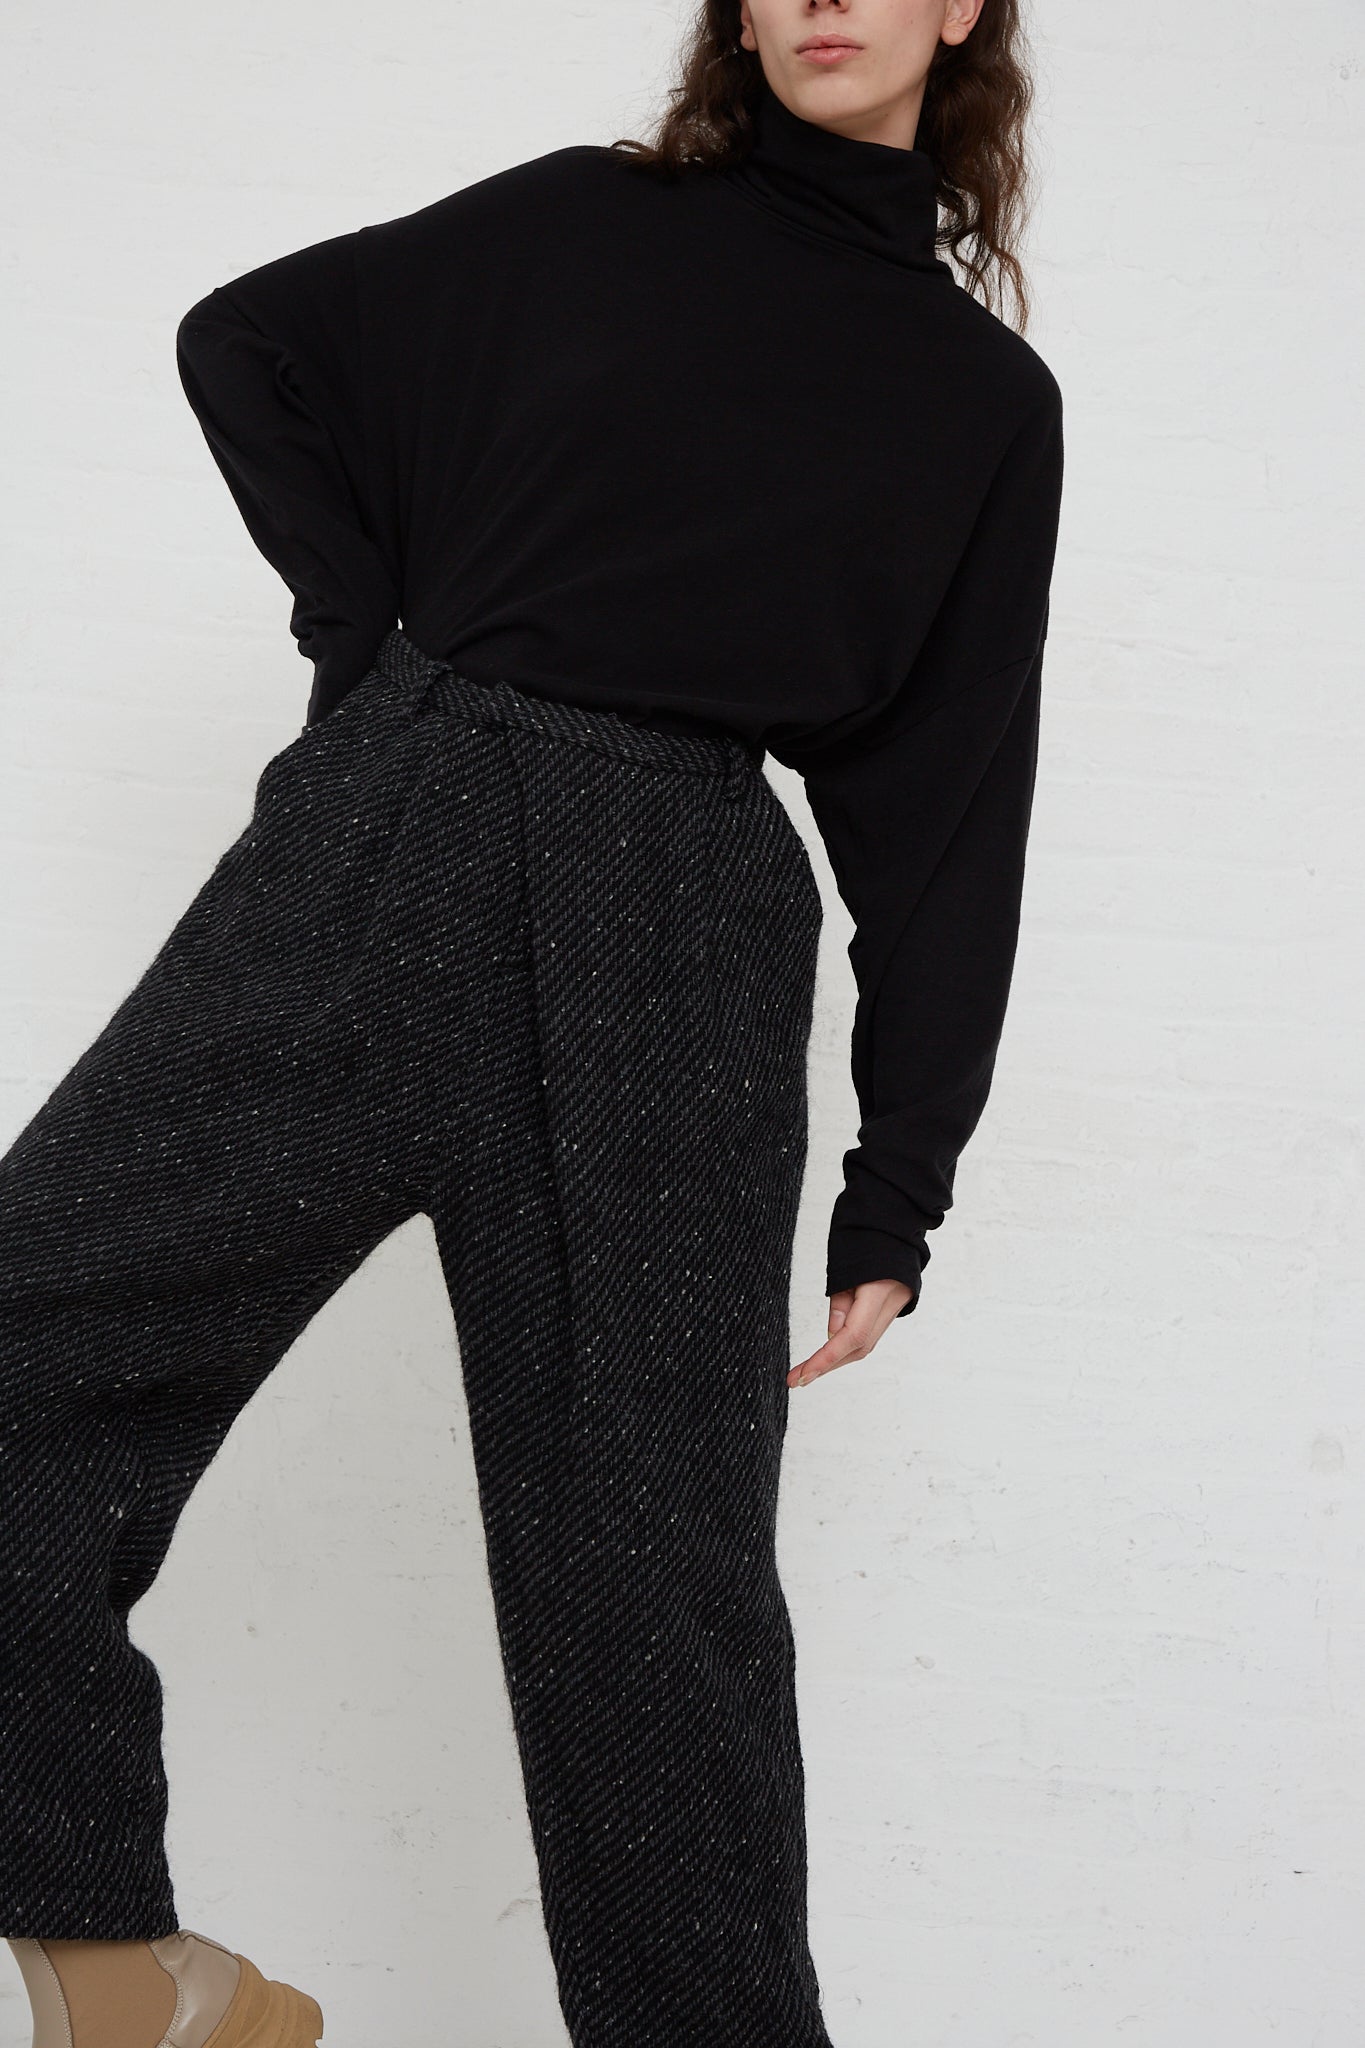 A woman wearing the Ichi Antiquités Snow Nep Wool Pant in Black and a black turtleneck sweater.